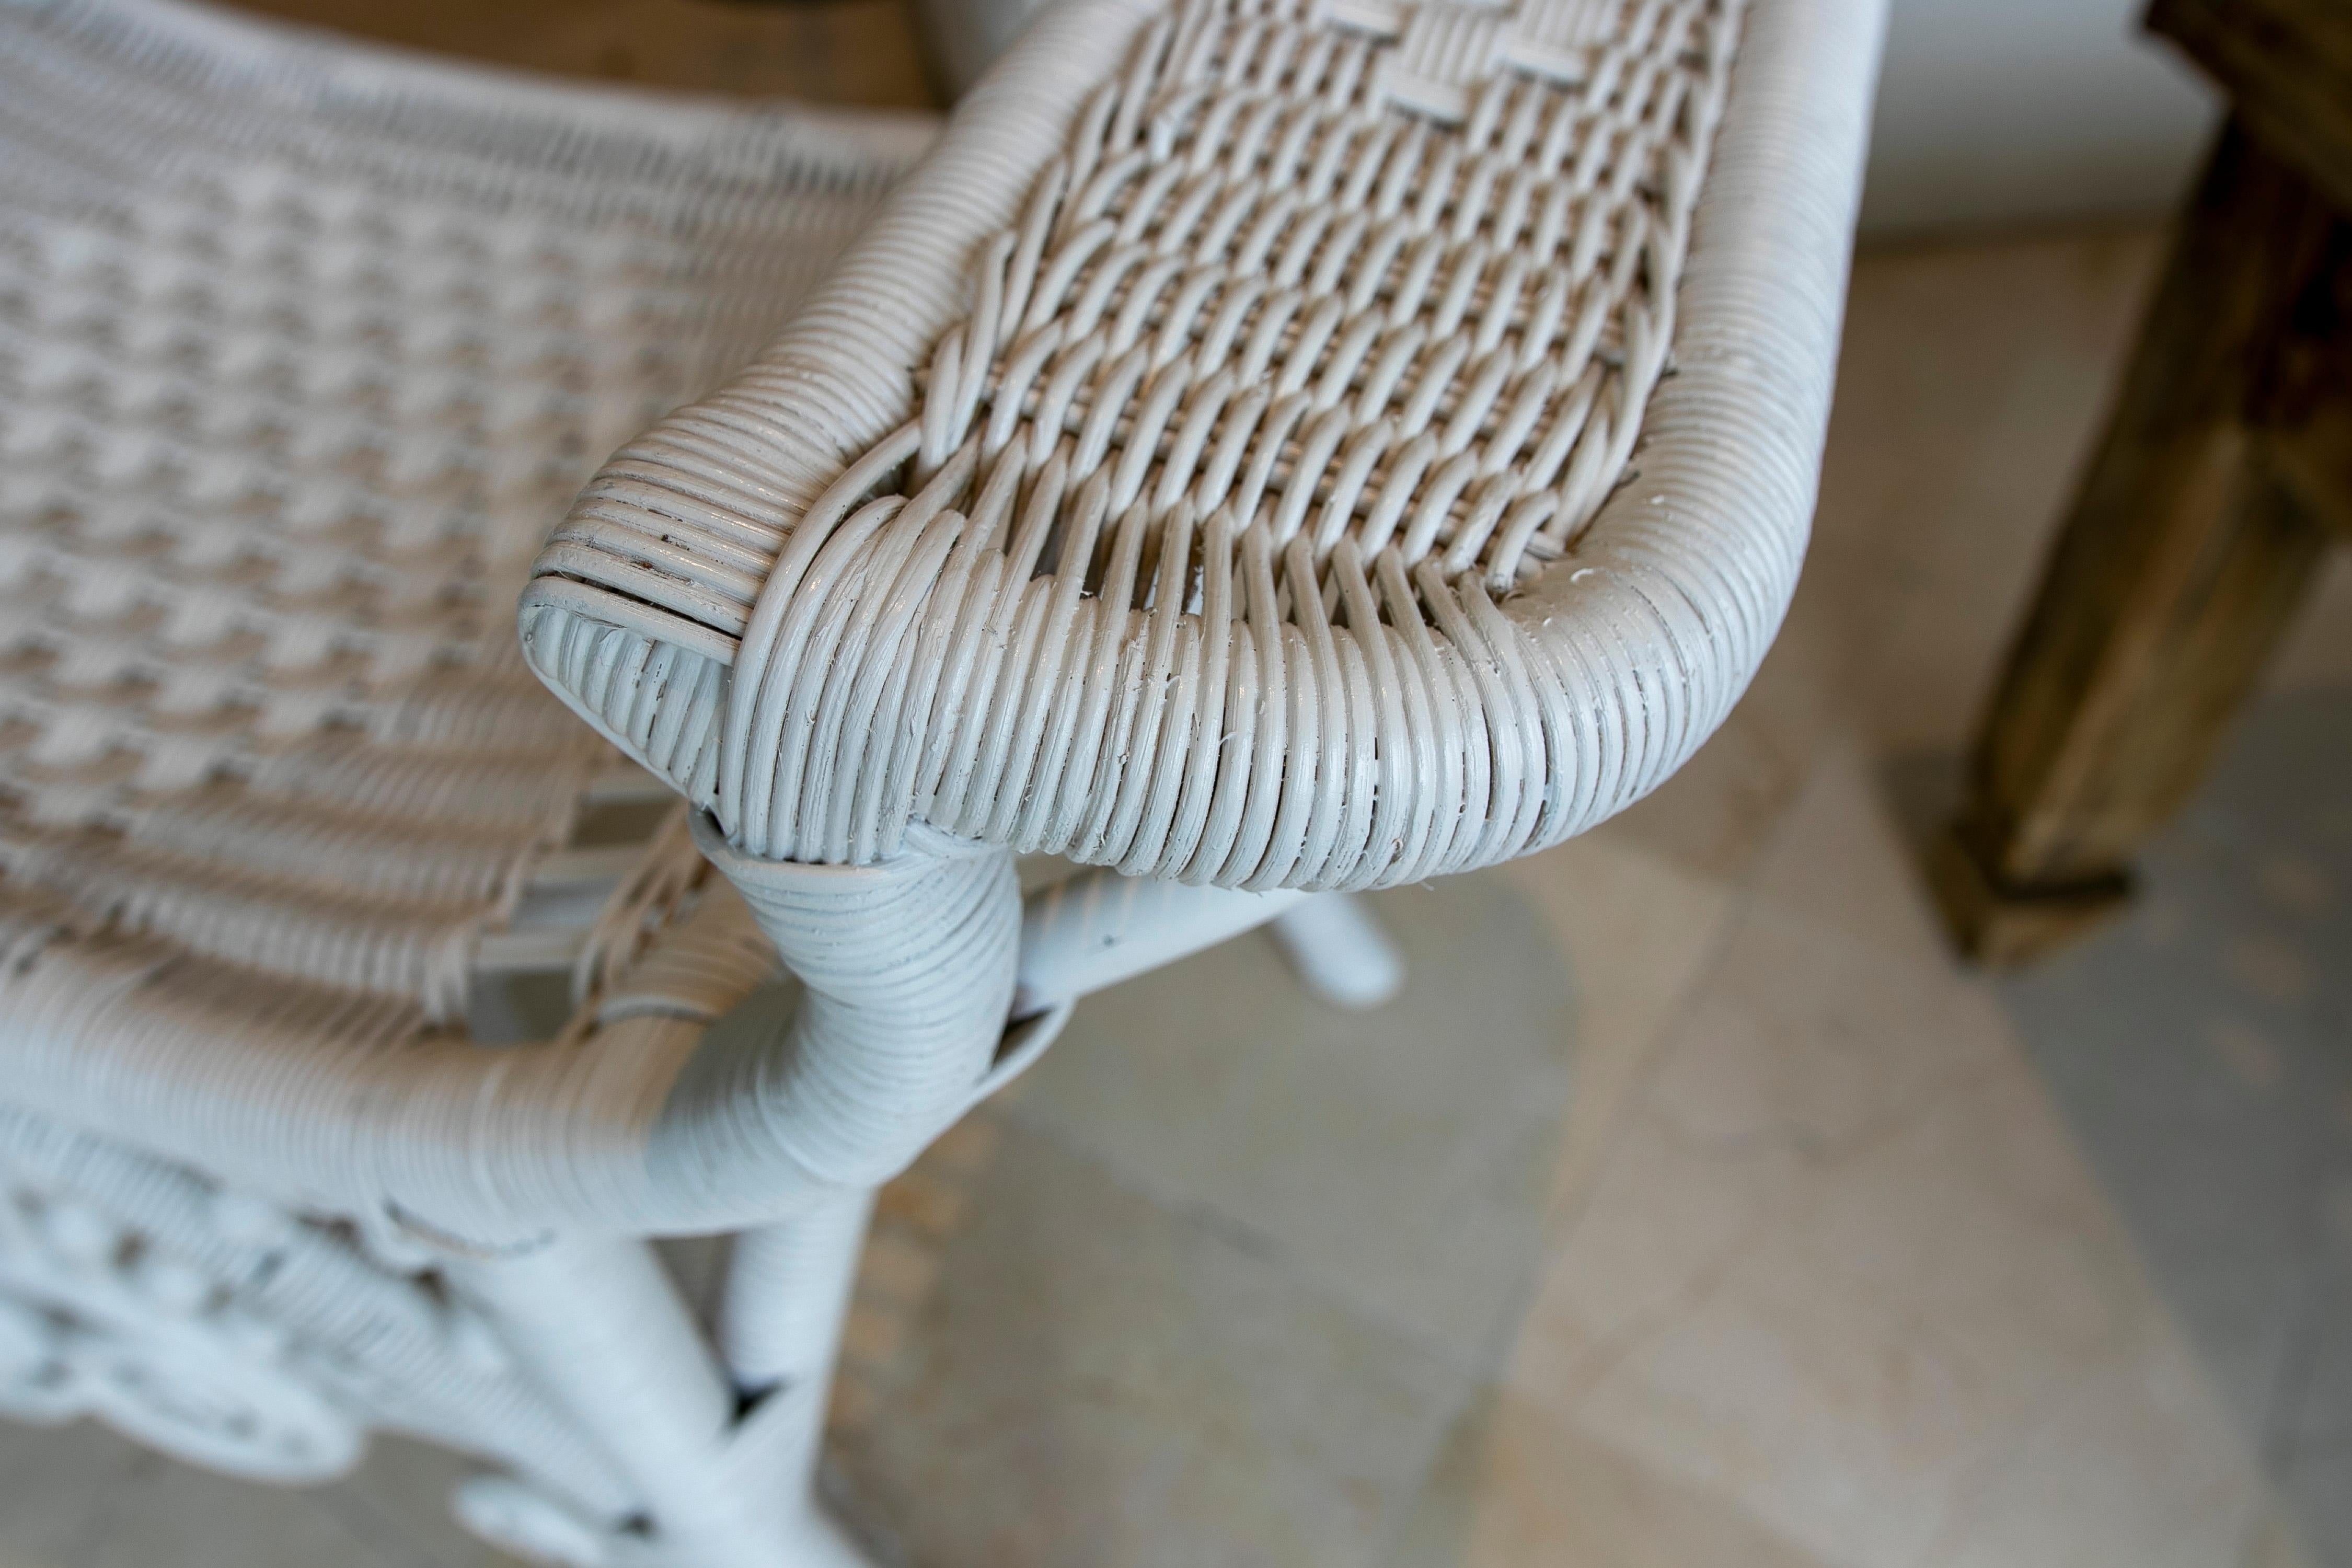 Spanish Pair of Handmade Wicker Stools Lacquered in White Colour For Sale 3